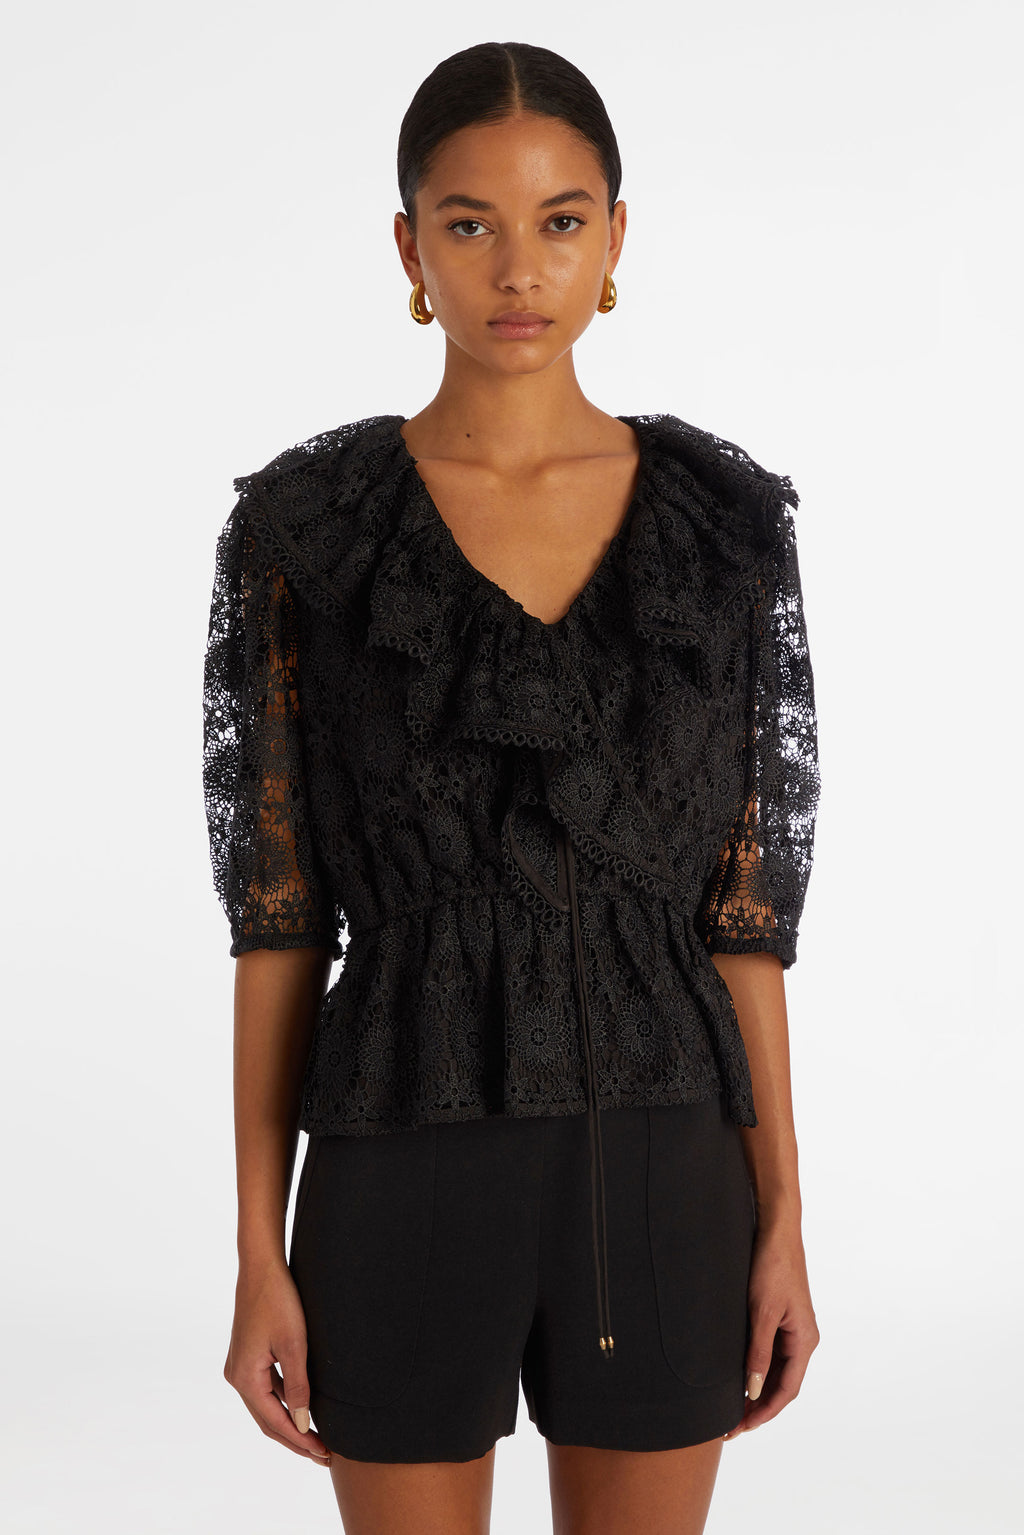 Top with three quarter sleeves in a solid black textured lace